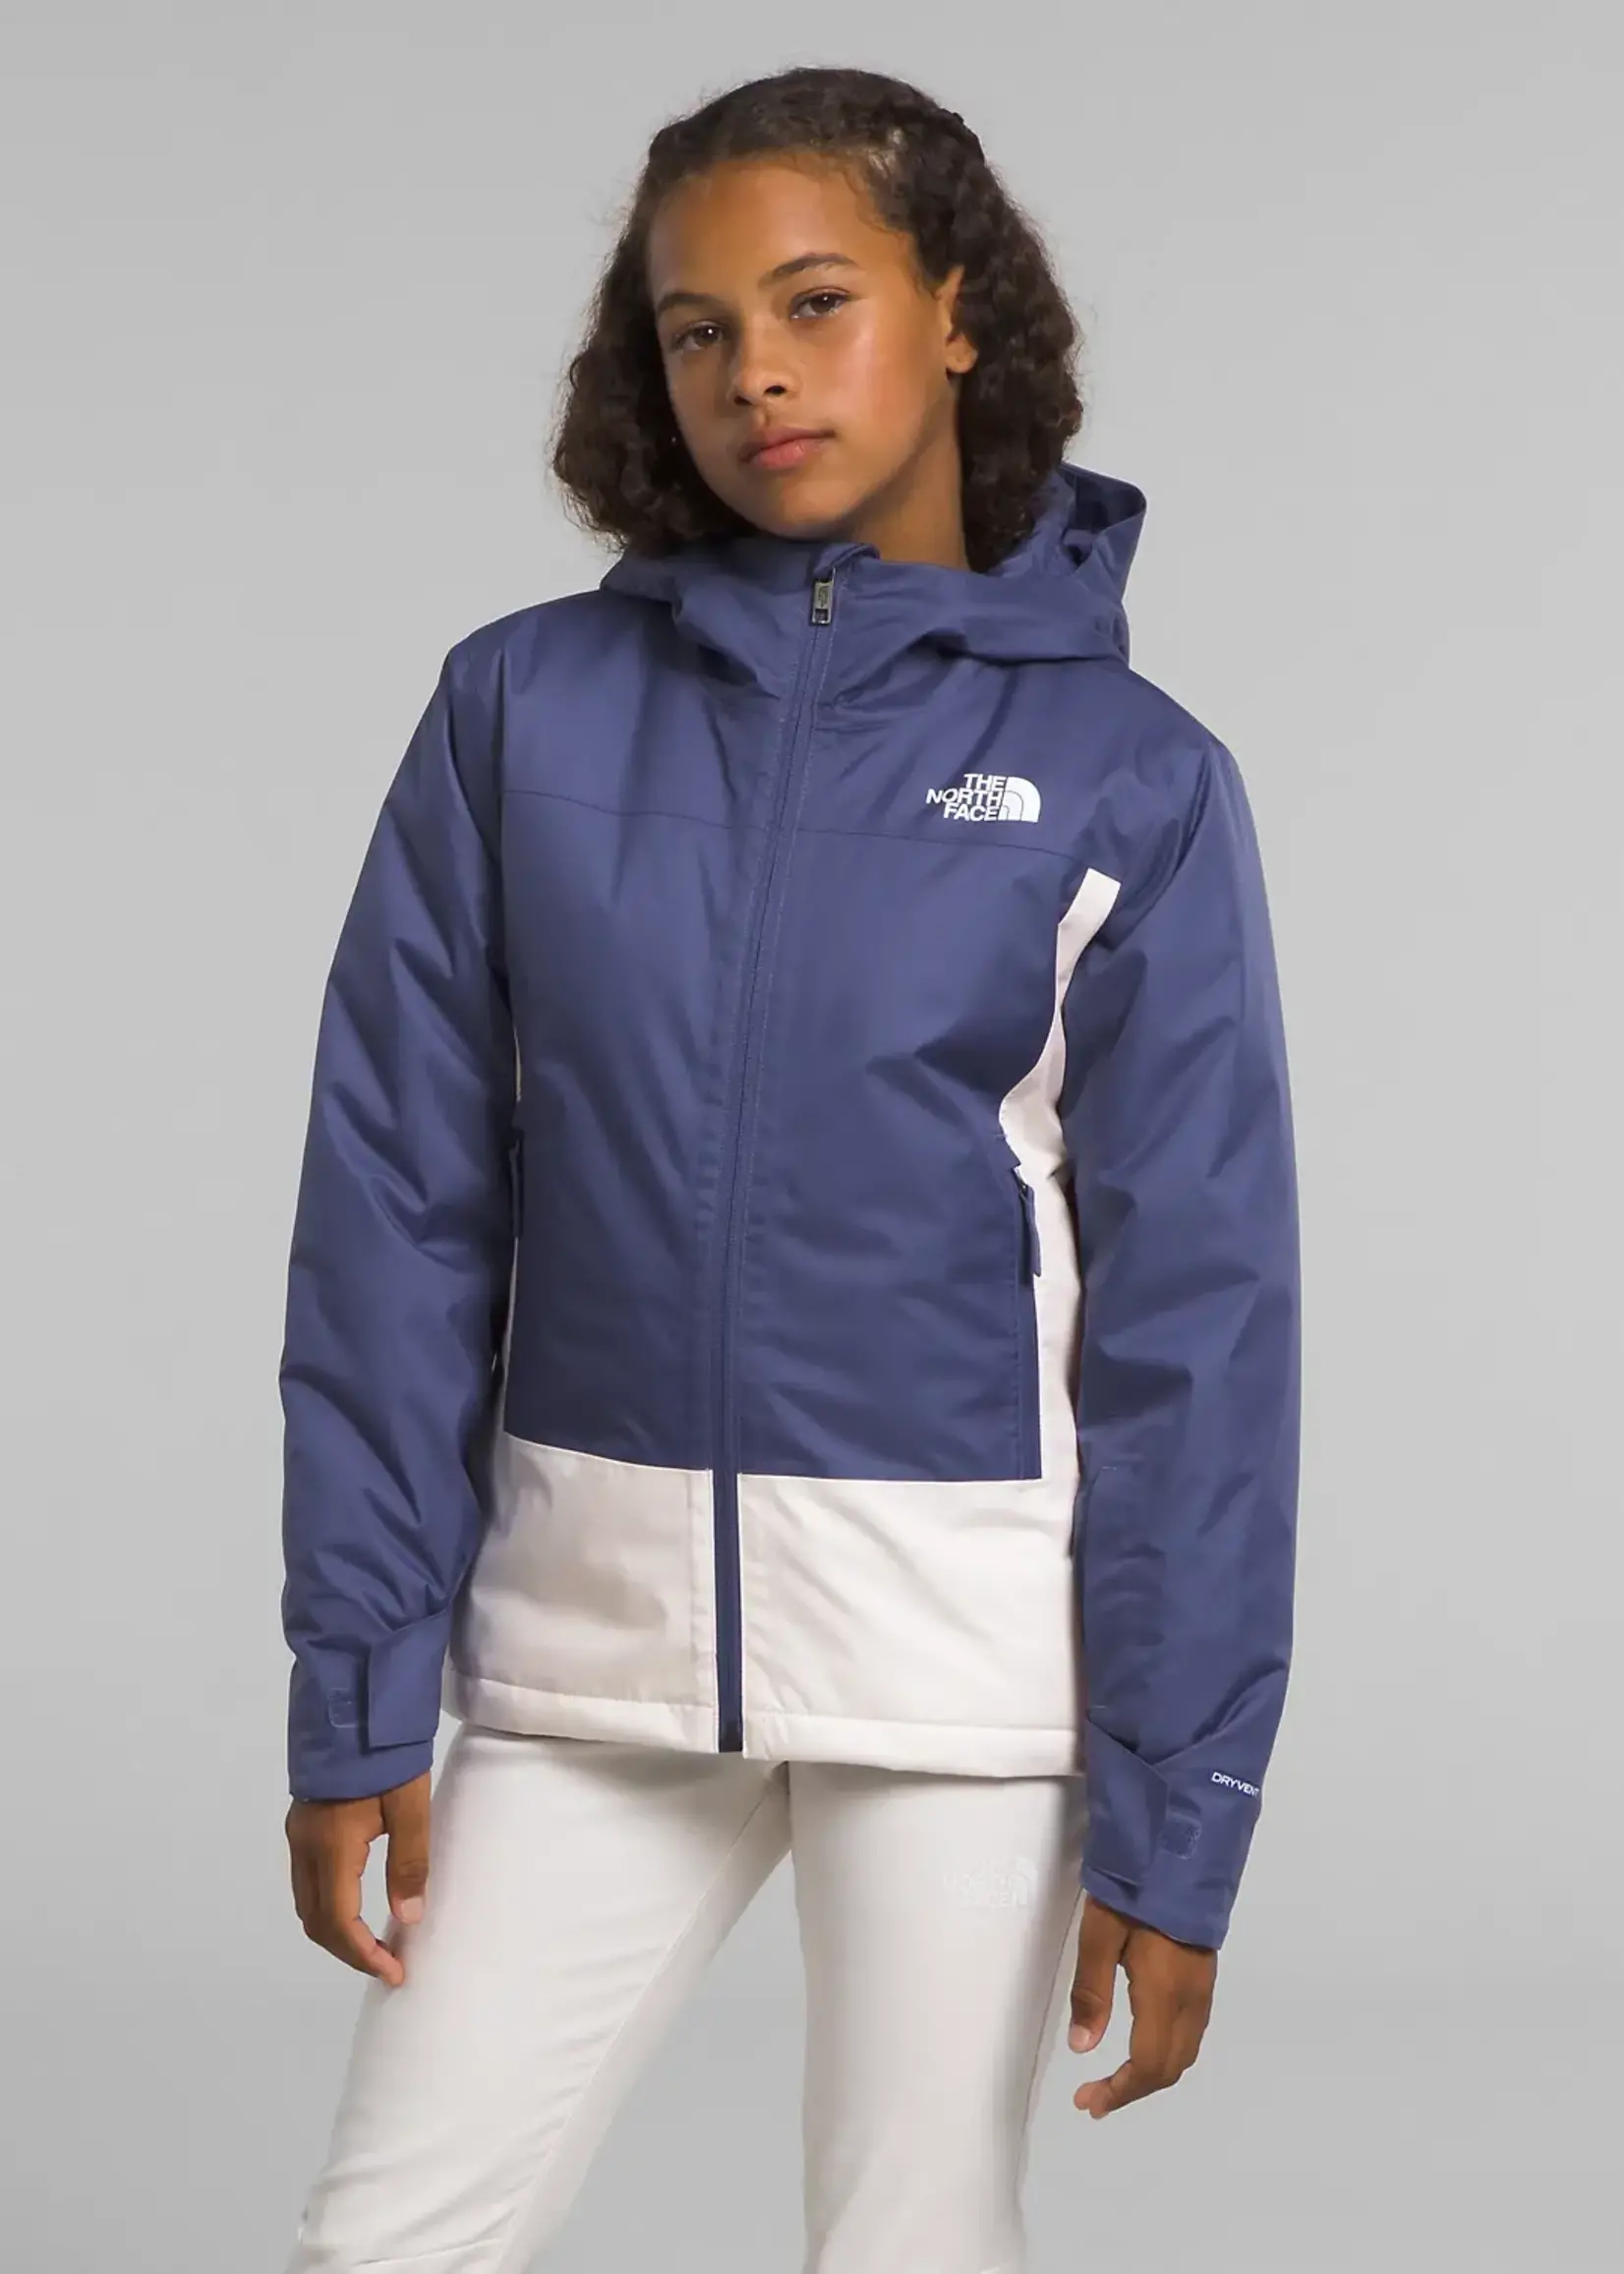 The North Face TNF Girls' Freedom Insulated Jacket